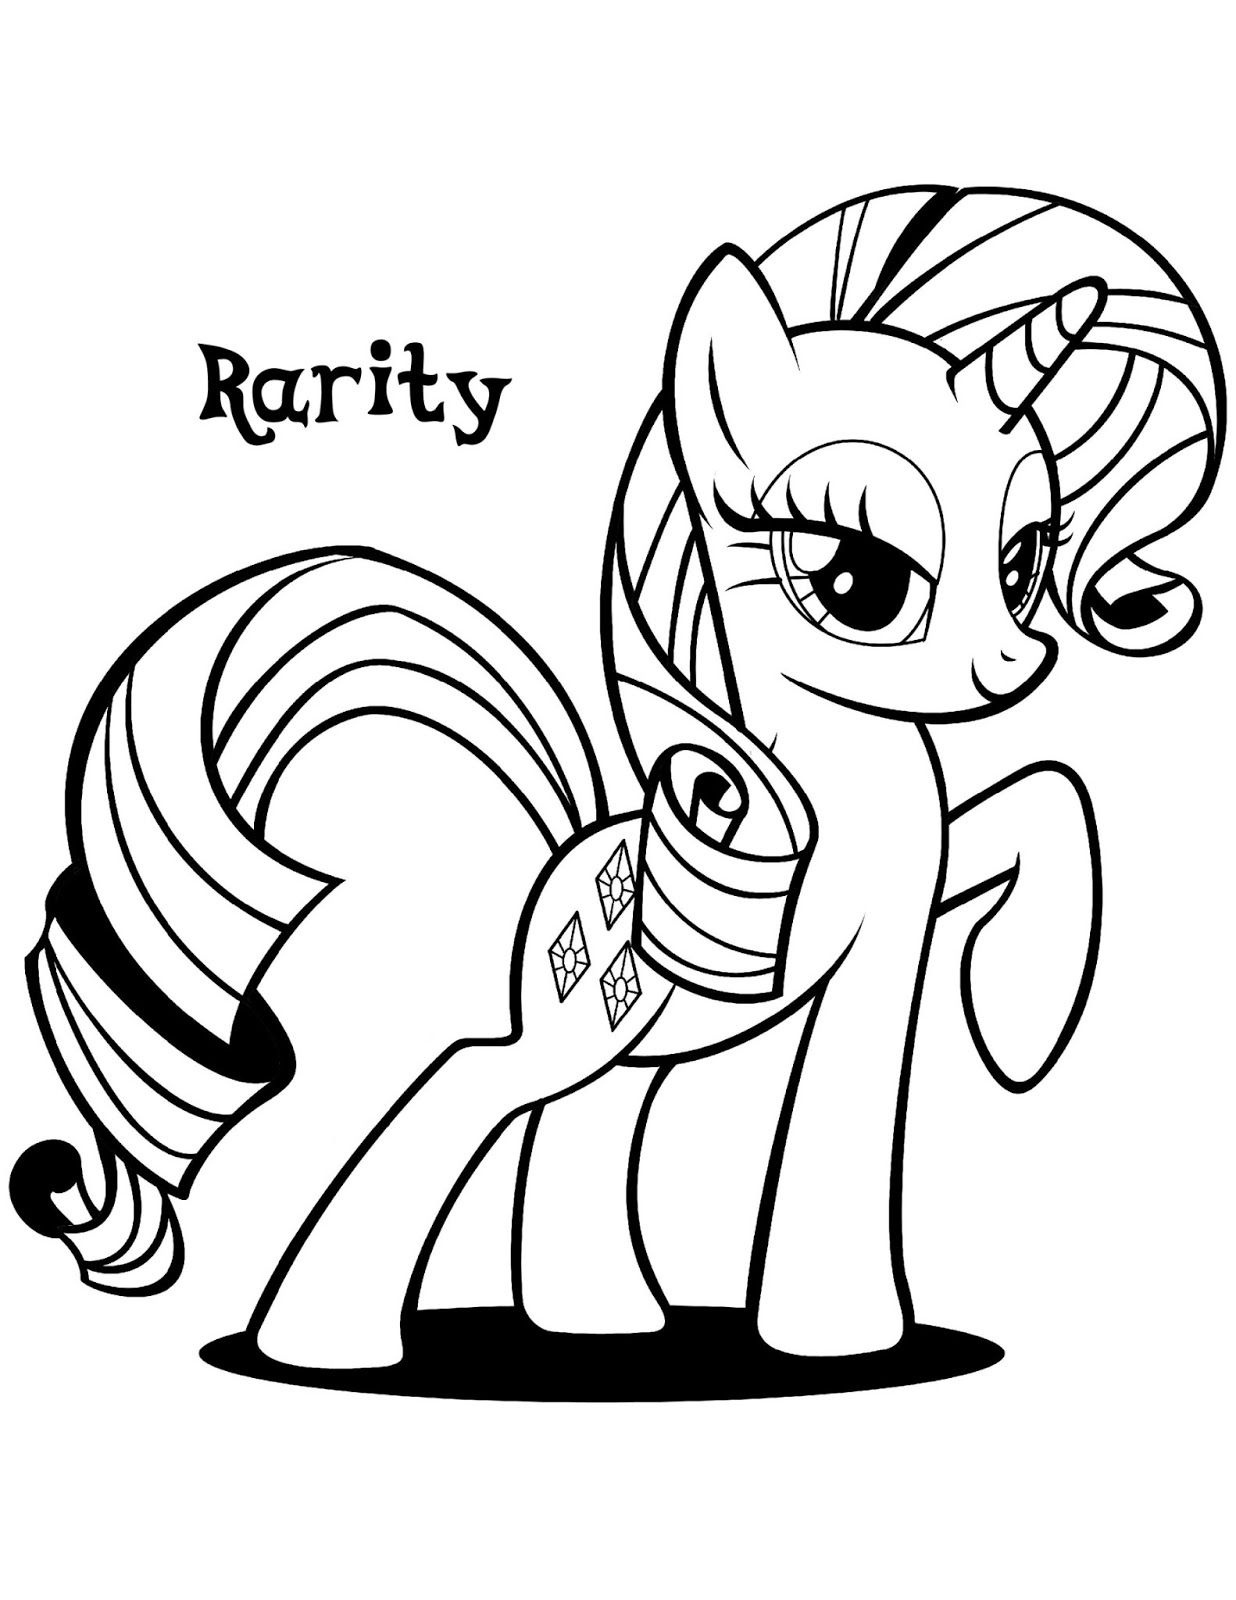 Mlp Printable Coloring Pages | Kids Under 7: My Little Pony Coloring - Free Printable Coloring Pages Of My Little Pony